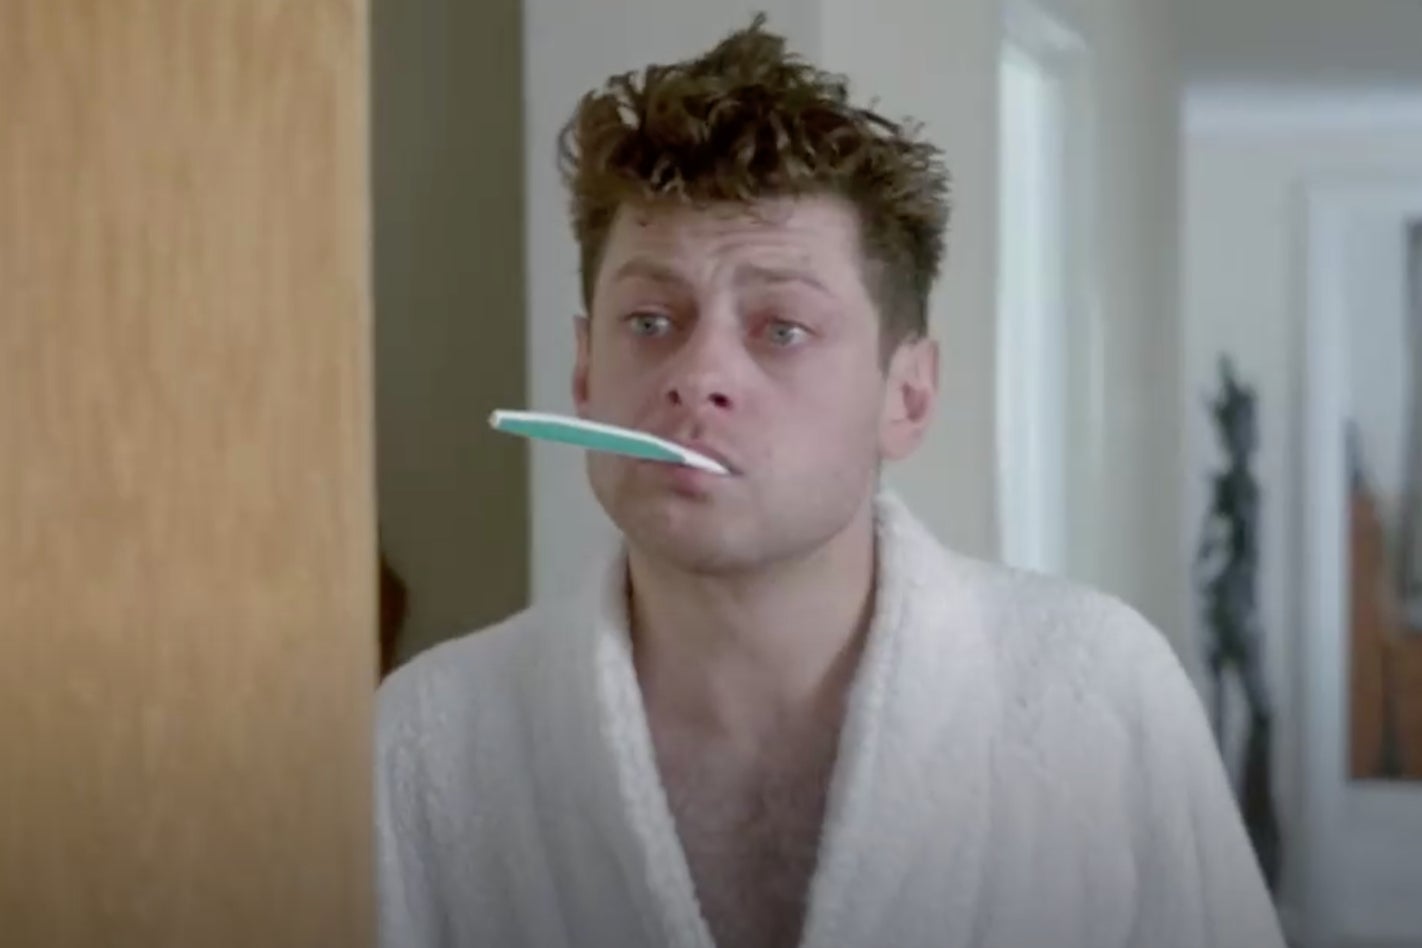 Serkis in one of his earliest roles, in Mike Leigh’s ‘Career Girls’